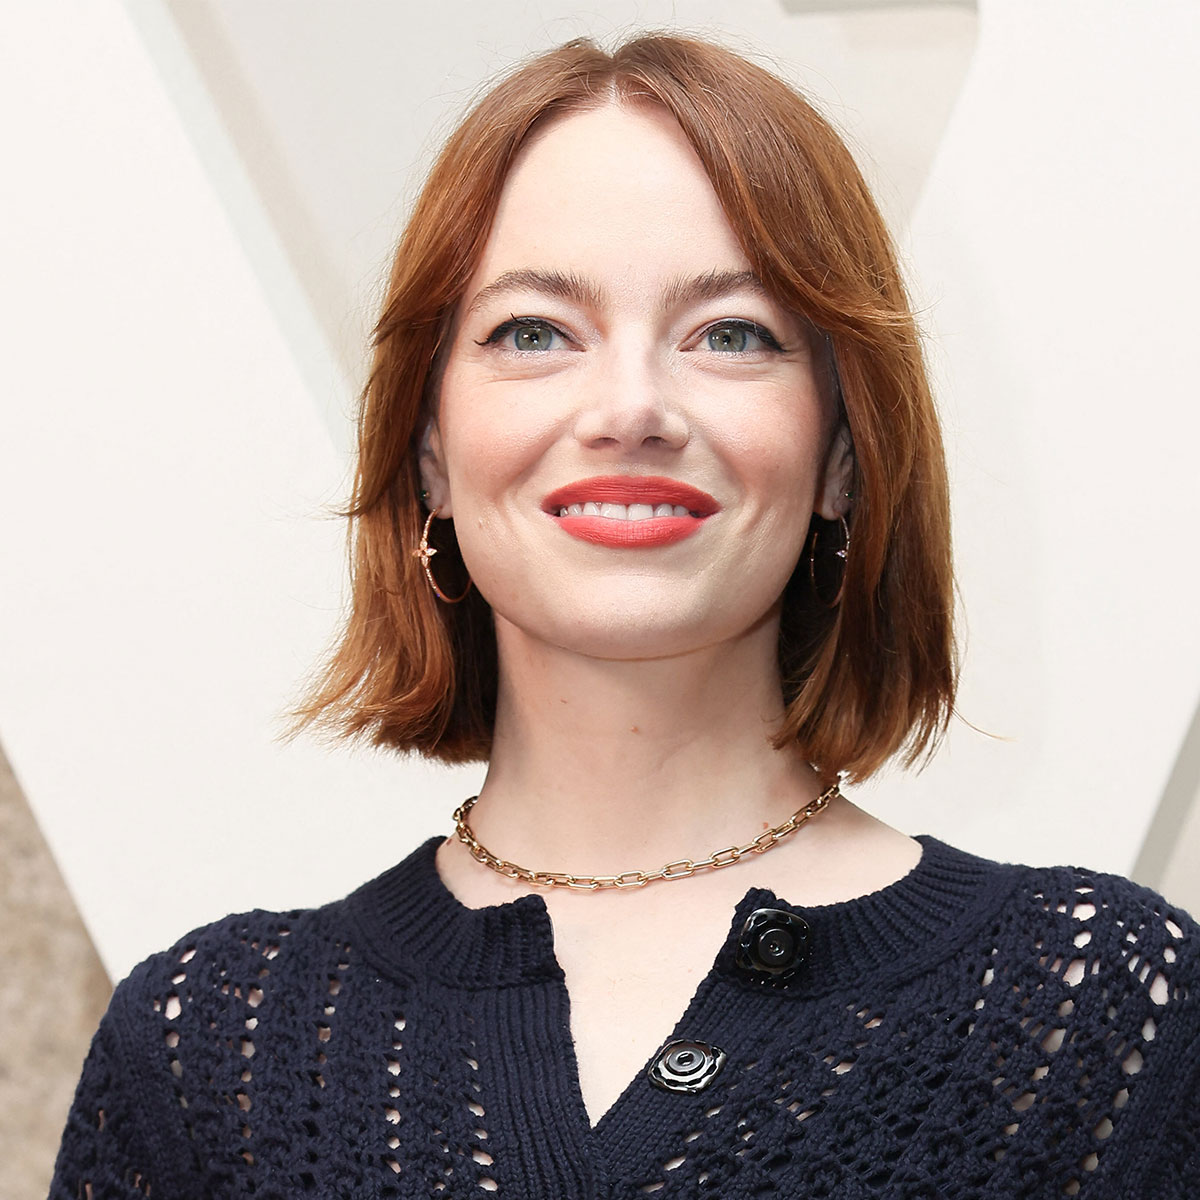 Emma Stone Shows Off Her Long Legs In A Trench Mini Dress And Sheer Tights  At NYC Film Festival - SHEfinds